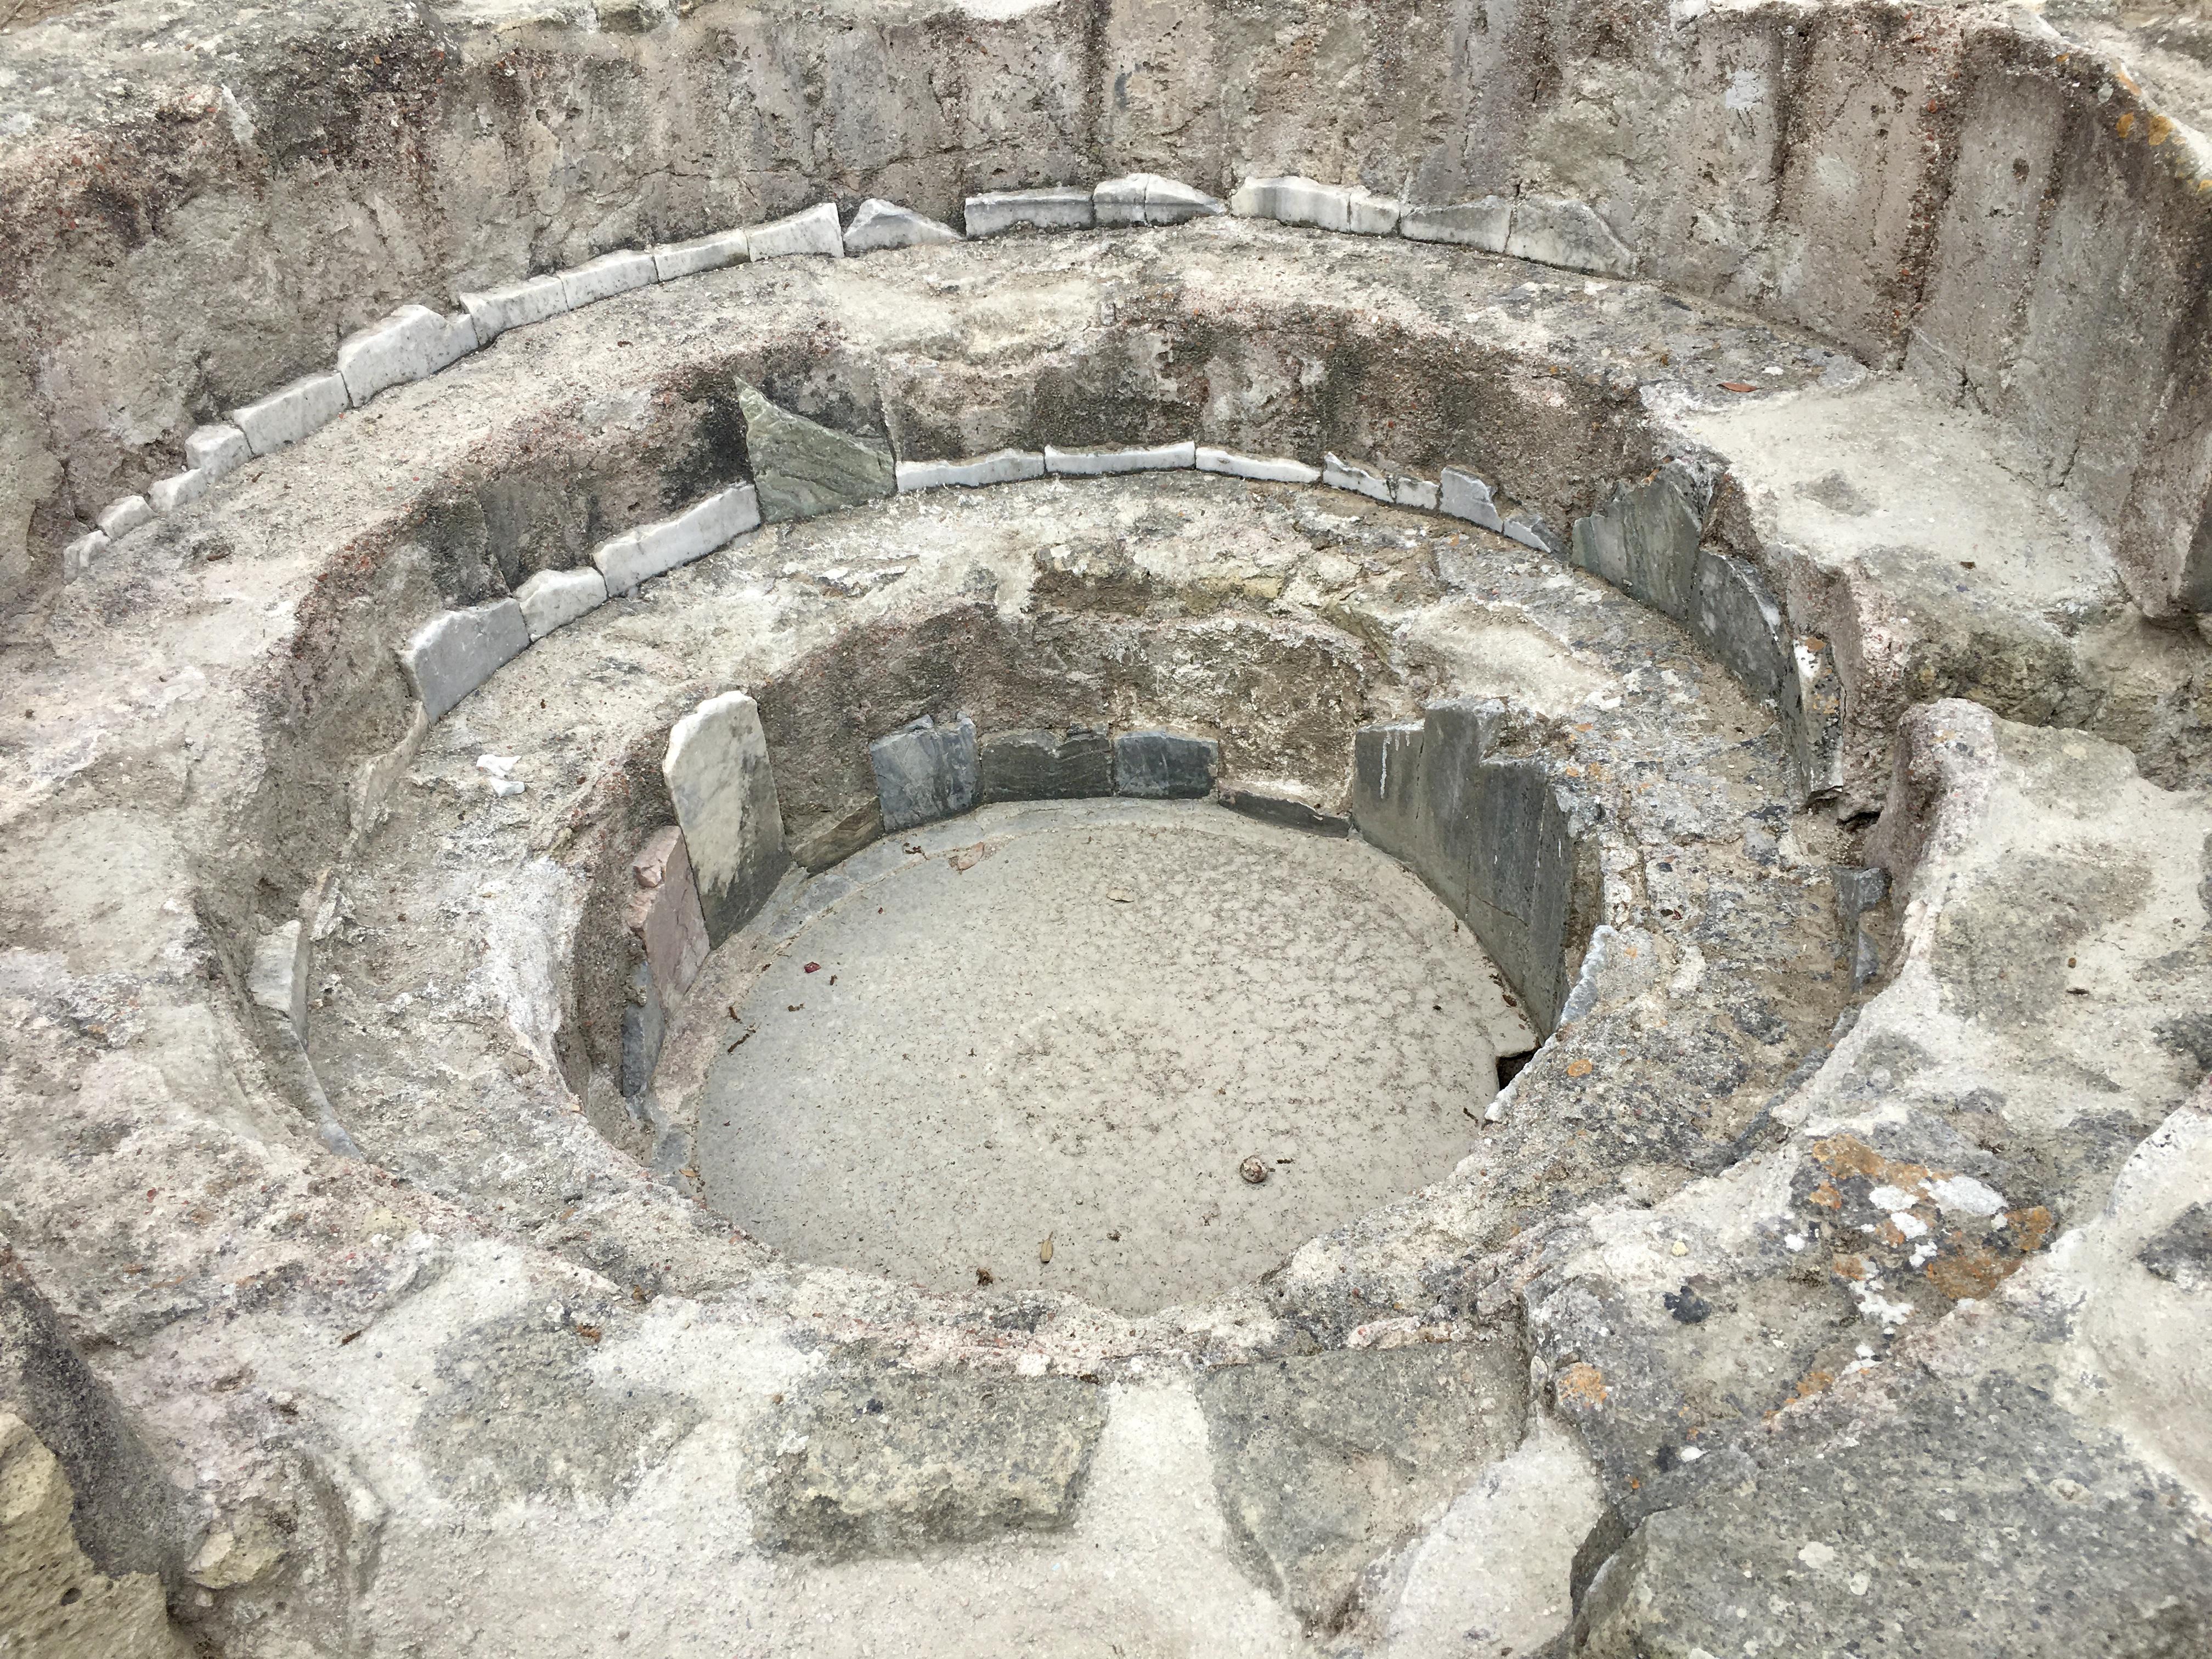 This baptismal fountain was installed by Byzantine settlers circa 500 CE, transforming a Greco-Roman "Temple of Zeus", built 1,000 years earlier, into a Paleochristian basilica. Numerous burials were made in the Archaic sanctuary foundations during Late Antiquity. Cumae Acropolis. Campania, Italy.